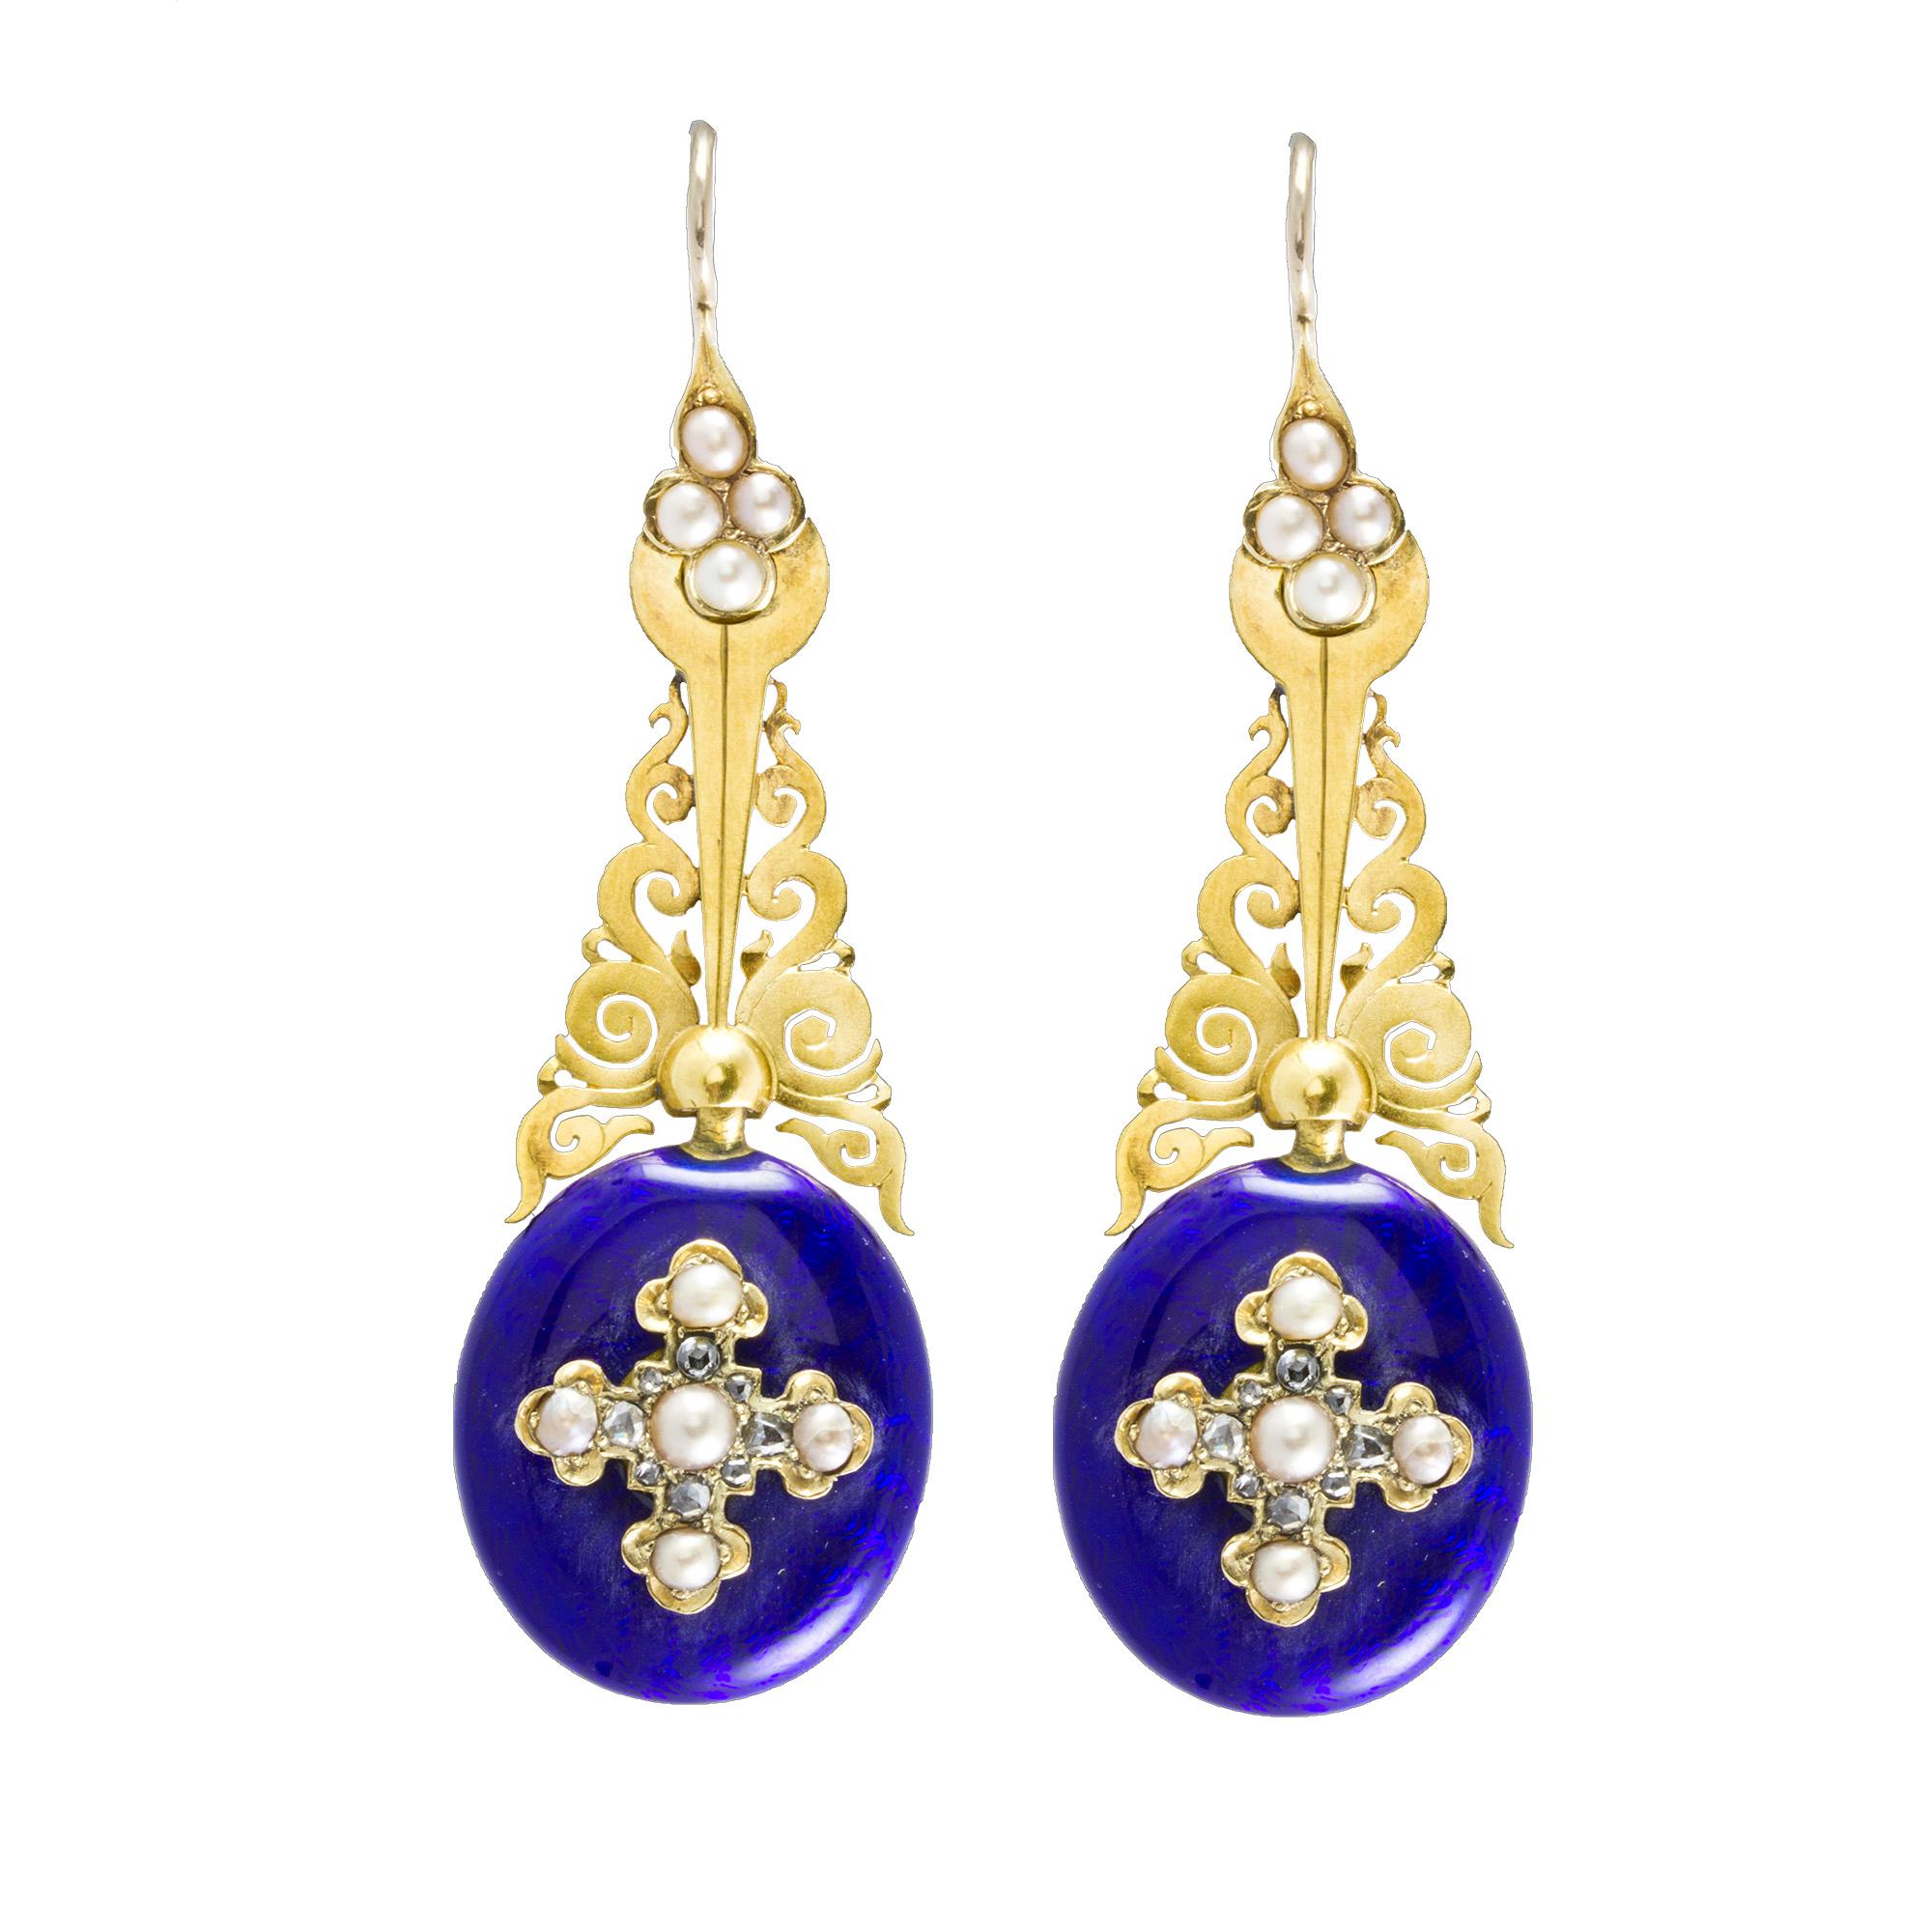 A Victorian blue enamel pair of earrings and locket, the oval drop set with pearl and diamond-set stylised Byzantine cross beneath gold scrolling runs, with matching locket, circa 1860, measuring approximately 3.6cm, gross weight 37.1 grams.

This